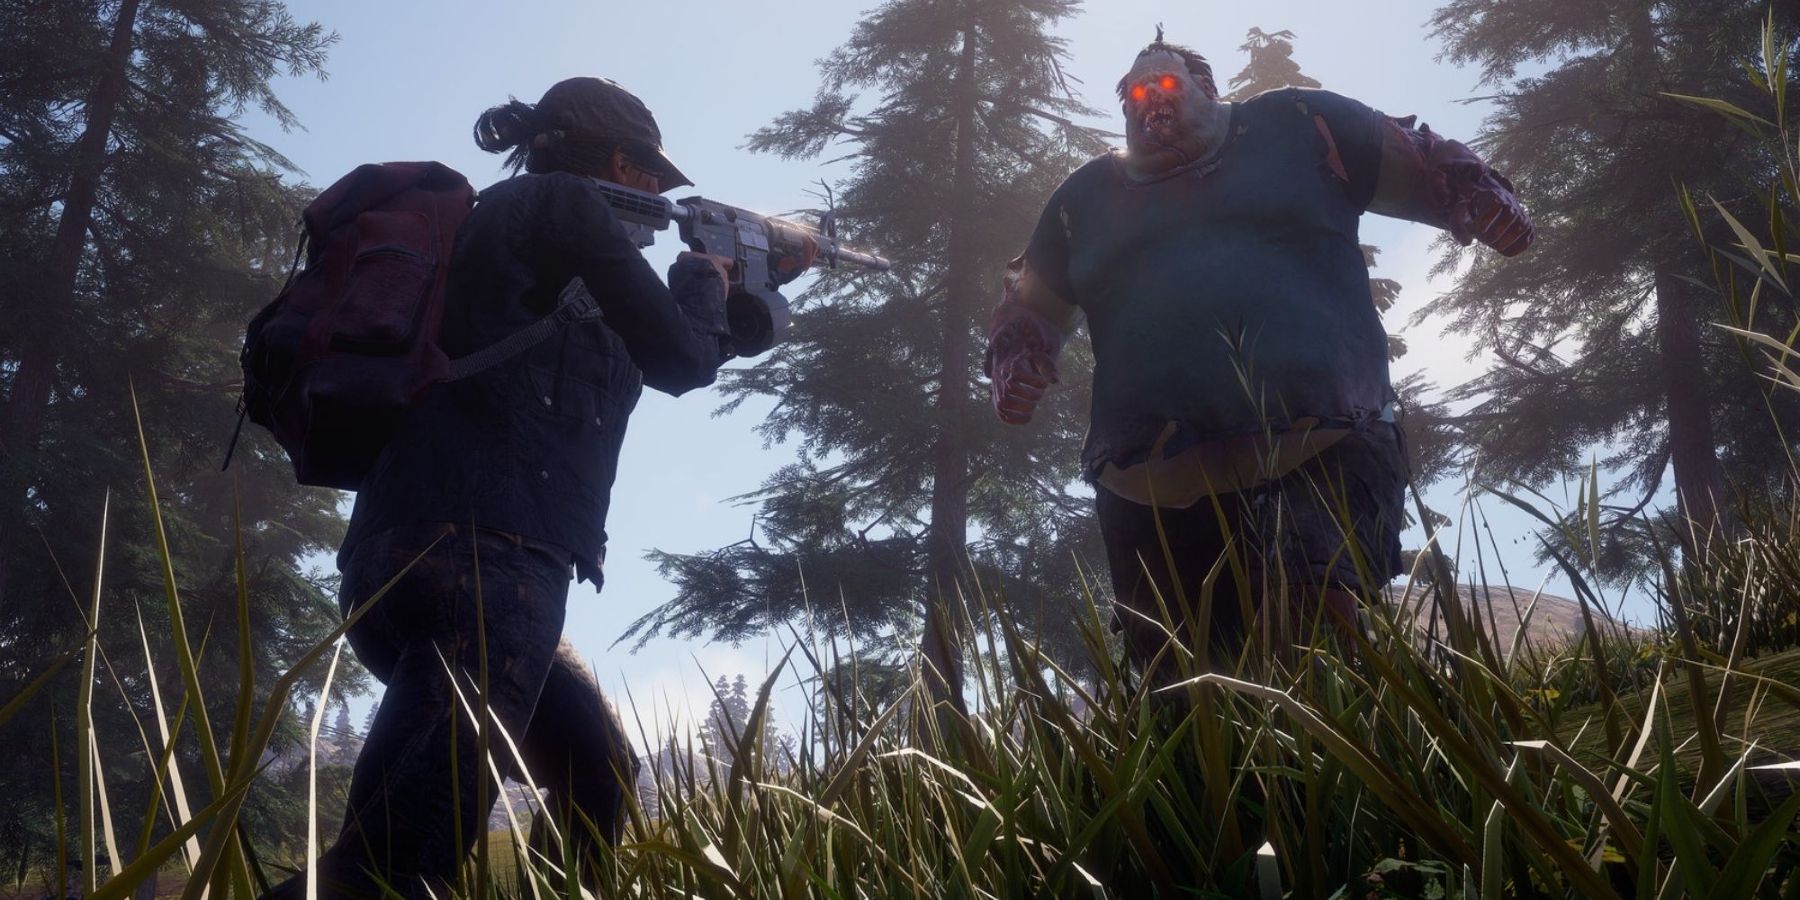 State of Decay 3' release date, details: Zombie animals could be a huge  problem in upcoming game